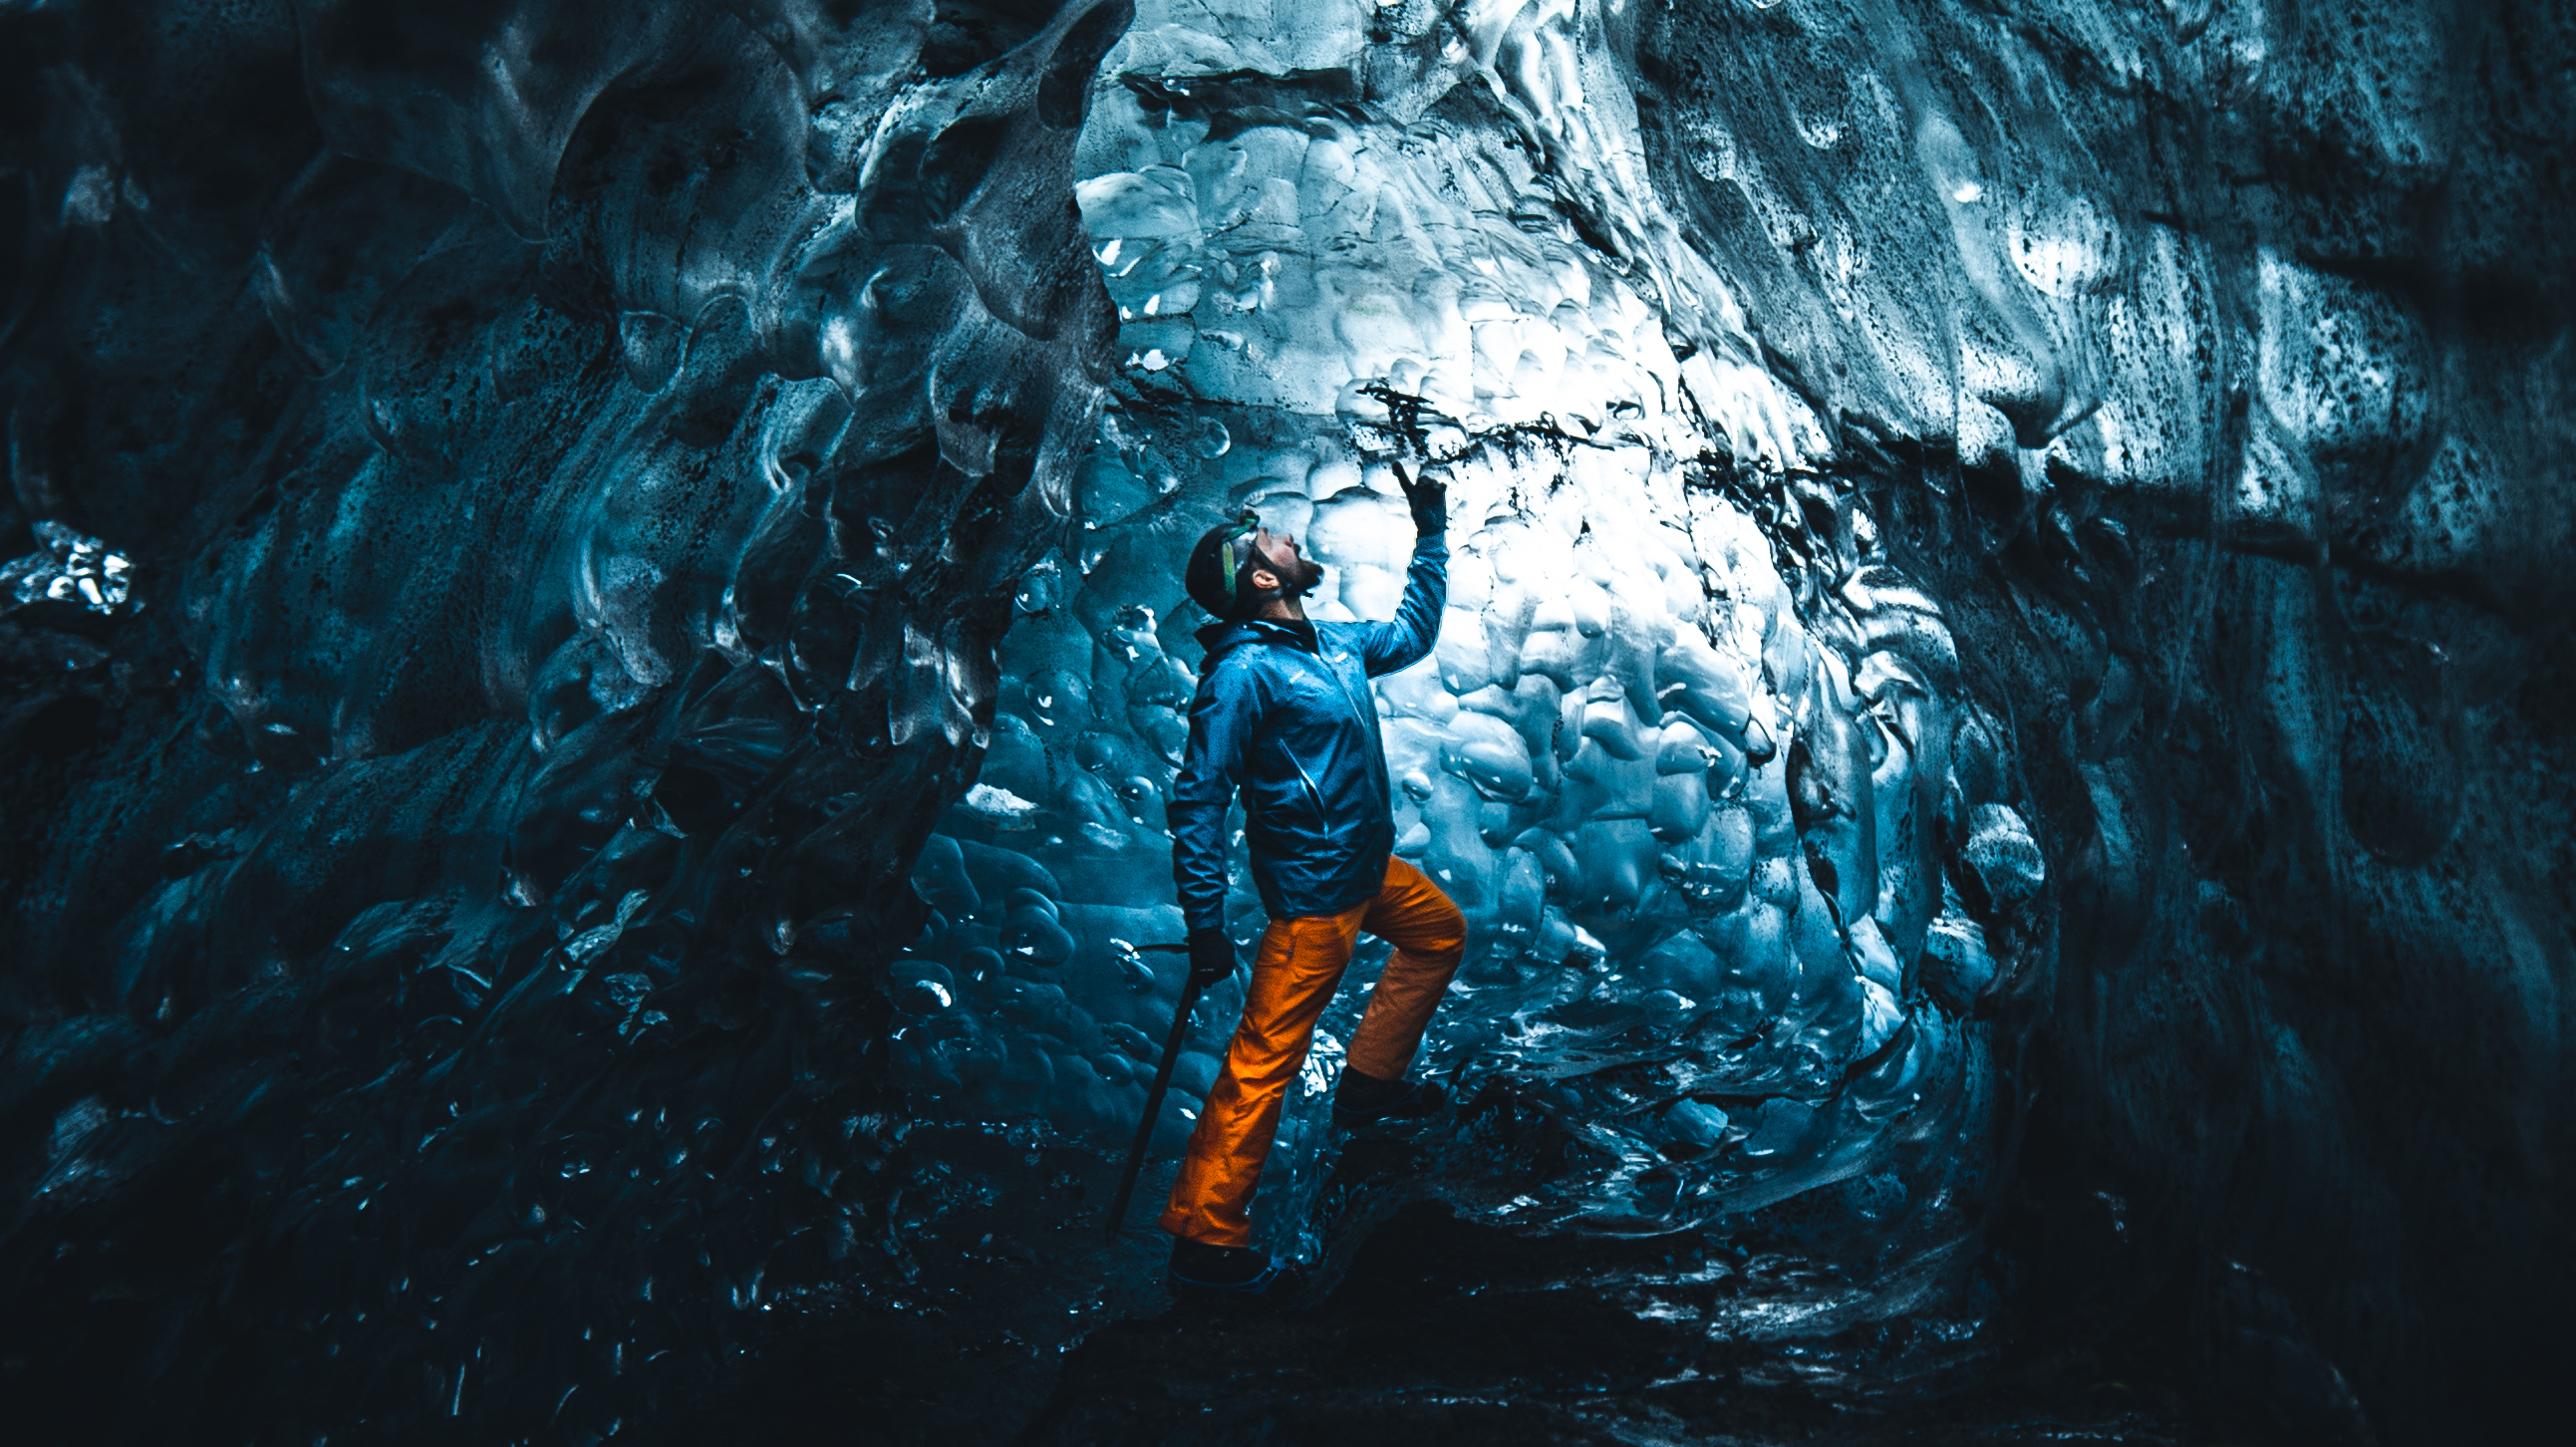 Natural glacier ice caves in Iceland have incredible blue colour inside.